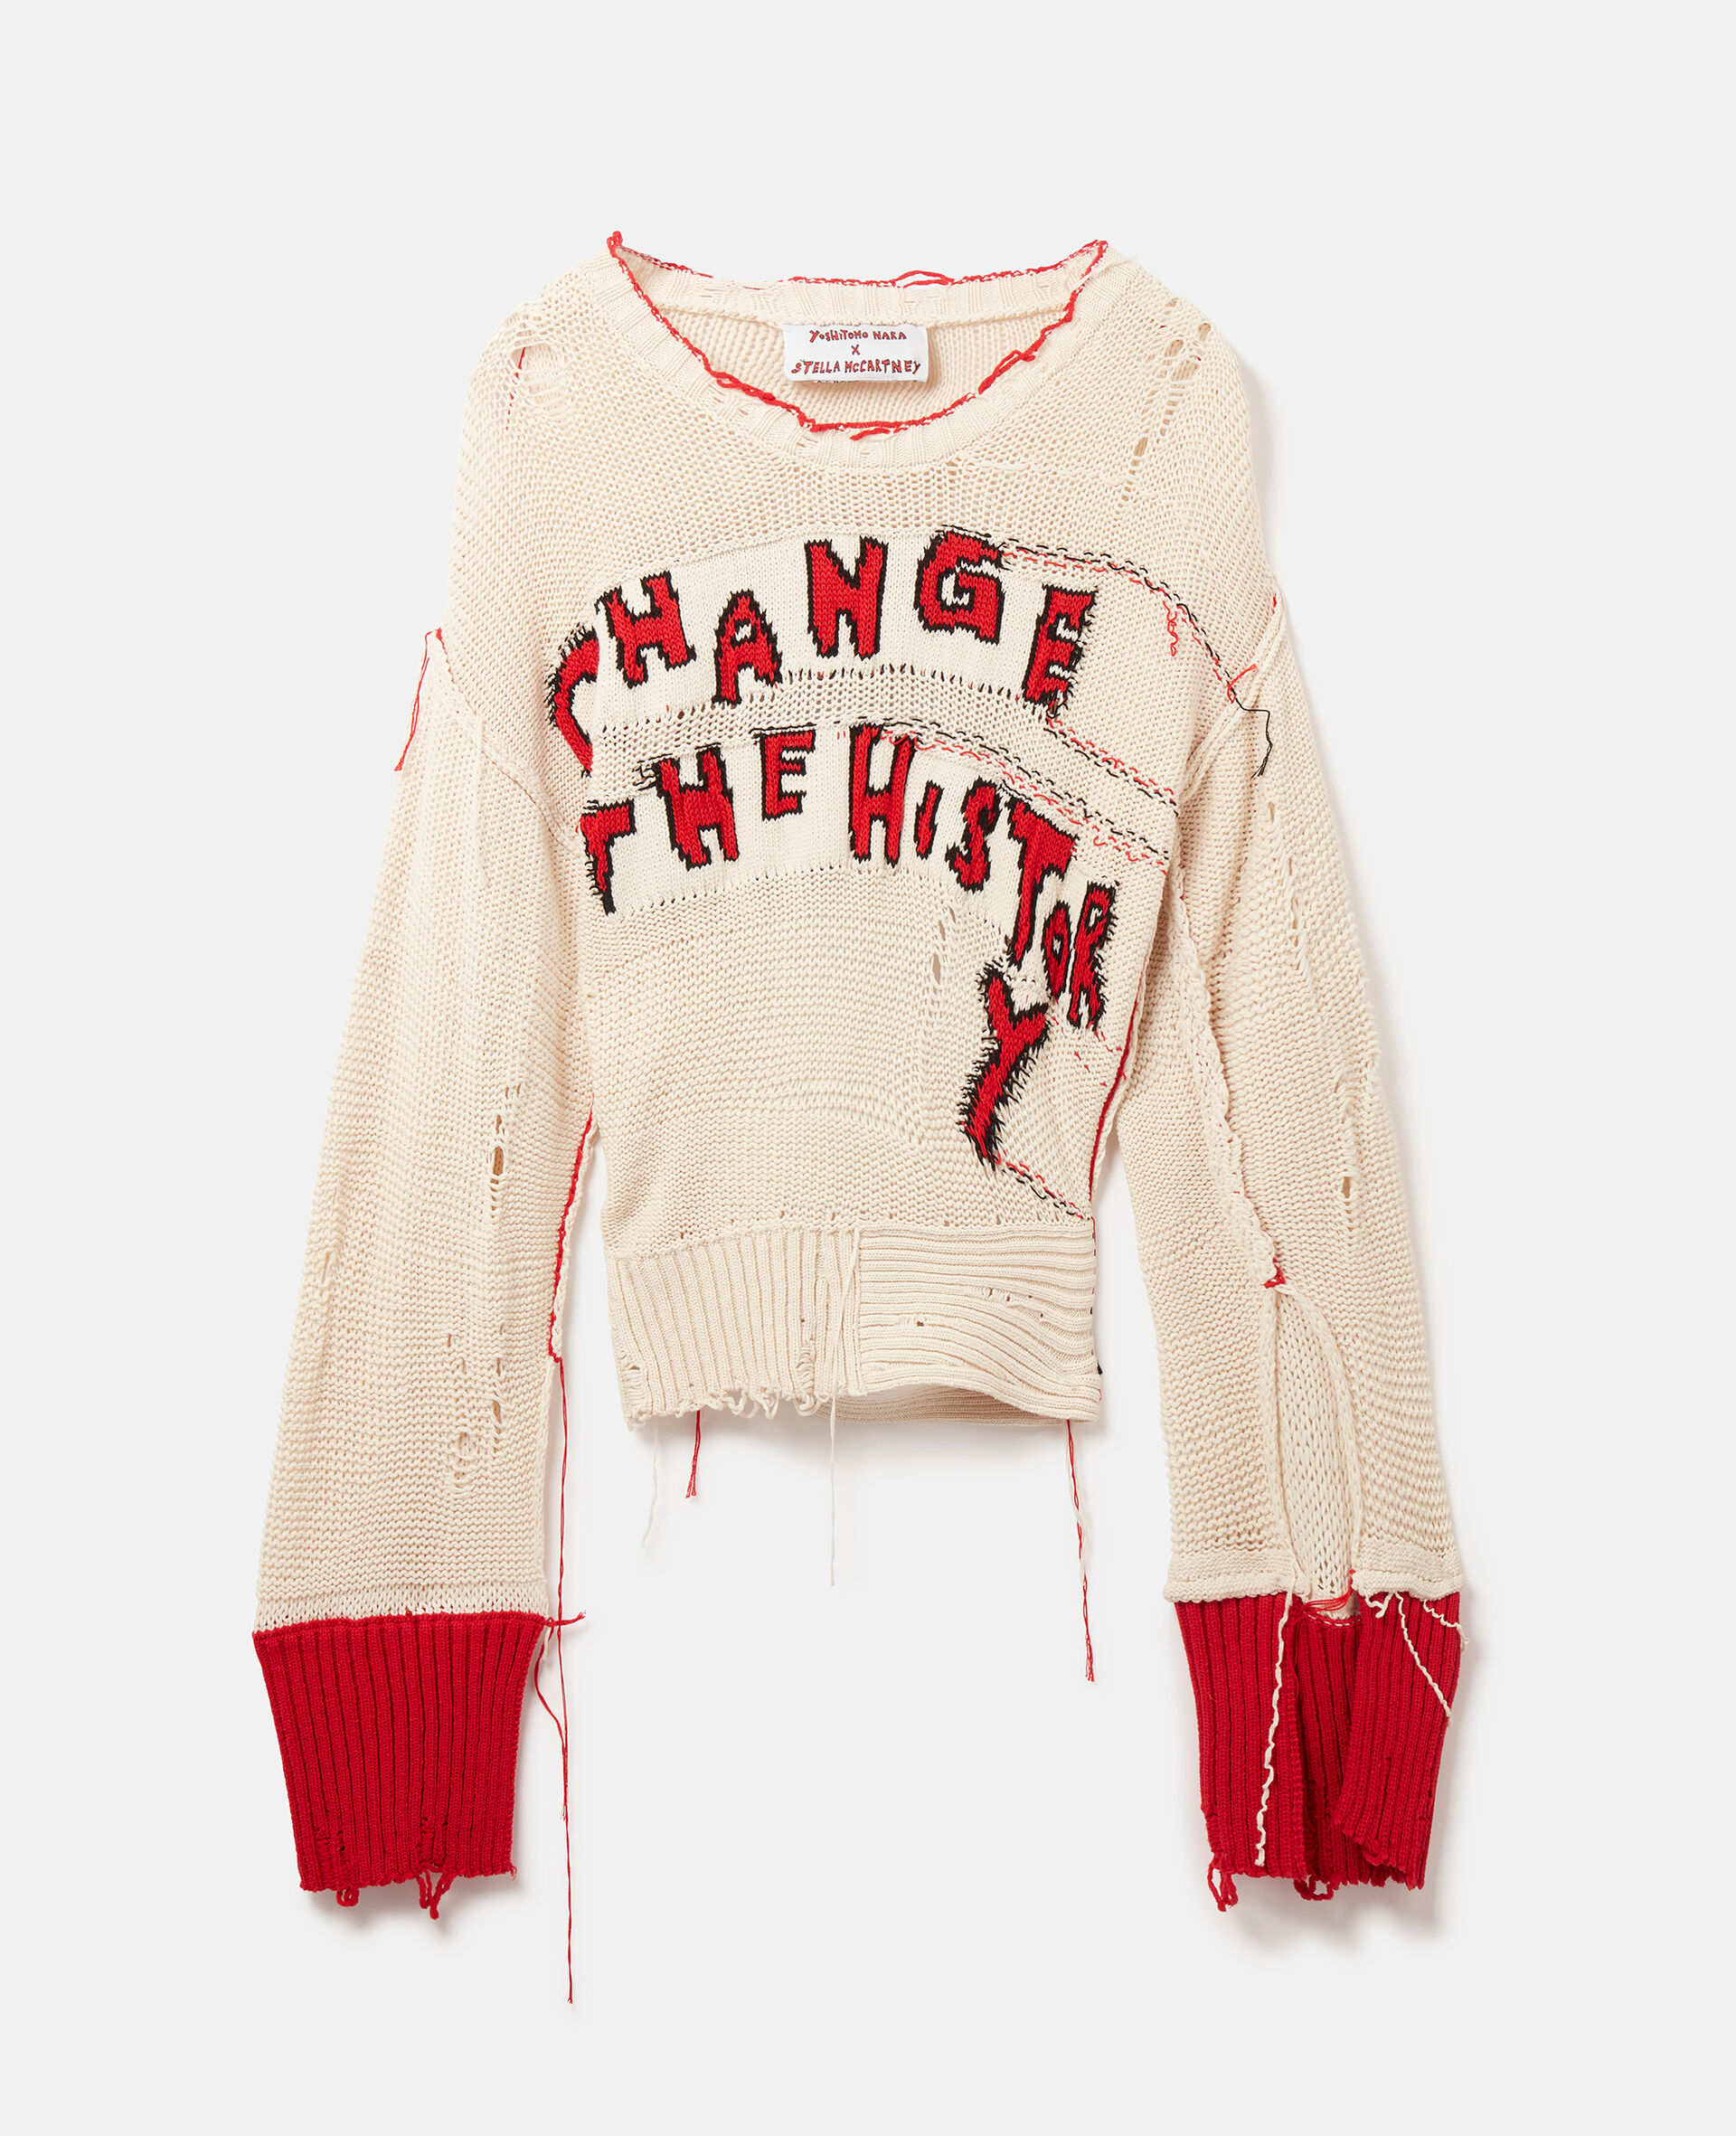 'CHANGE THE HISTORY' Jumper-Multicolour-large image number 0